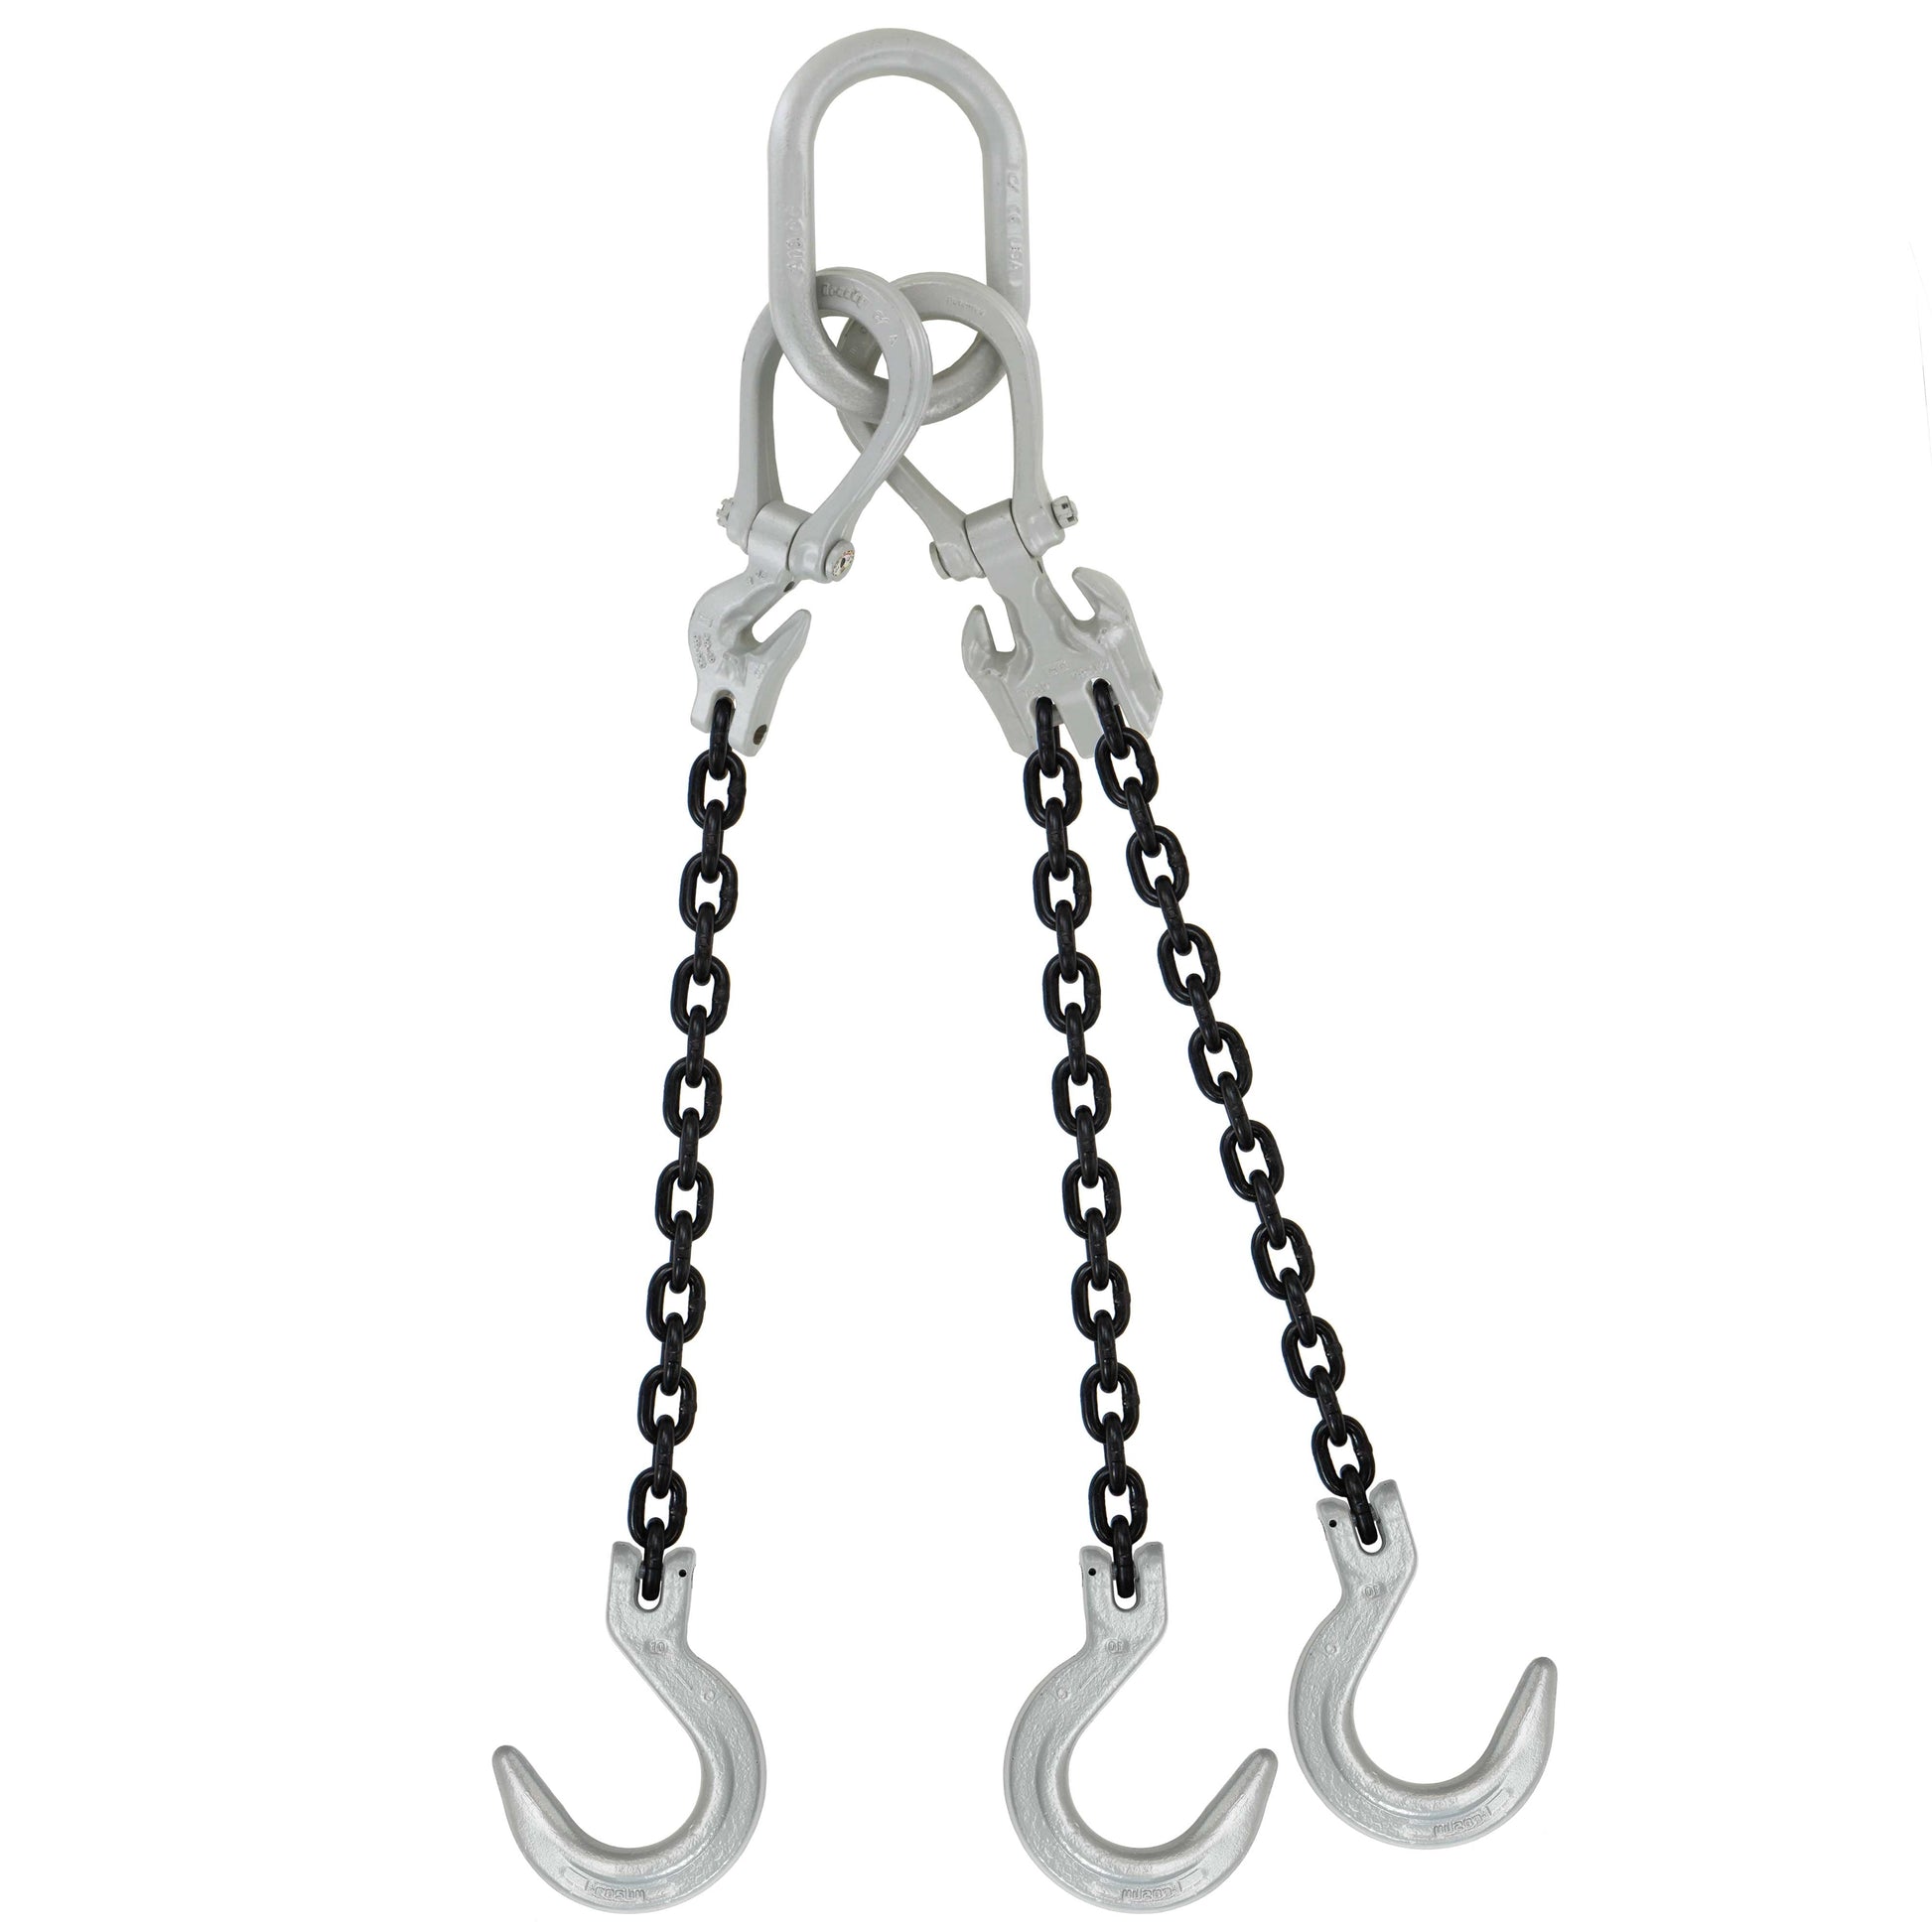 12 inch x 10 foot Domestic Adjustable 3 Leg Chain Sling w Crosby Foundry Hooks Grade 100 image 1 of 2